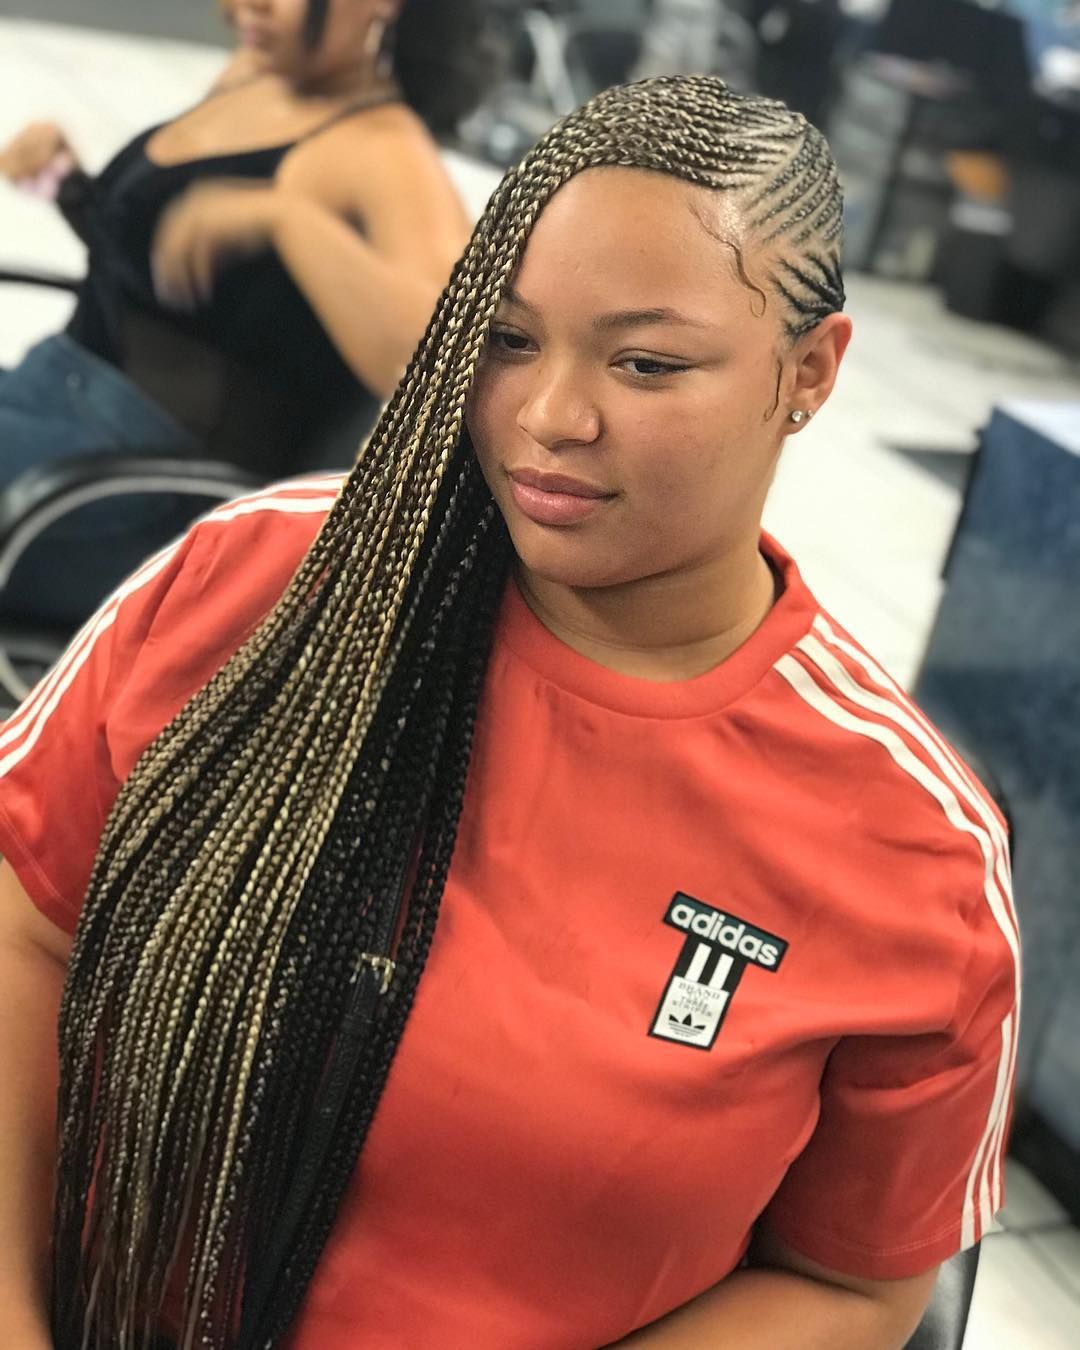 Latest Ladies Hair Style 2021 - Courts 2021 Woman 2